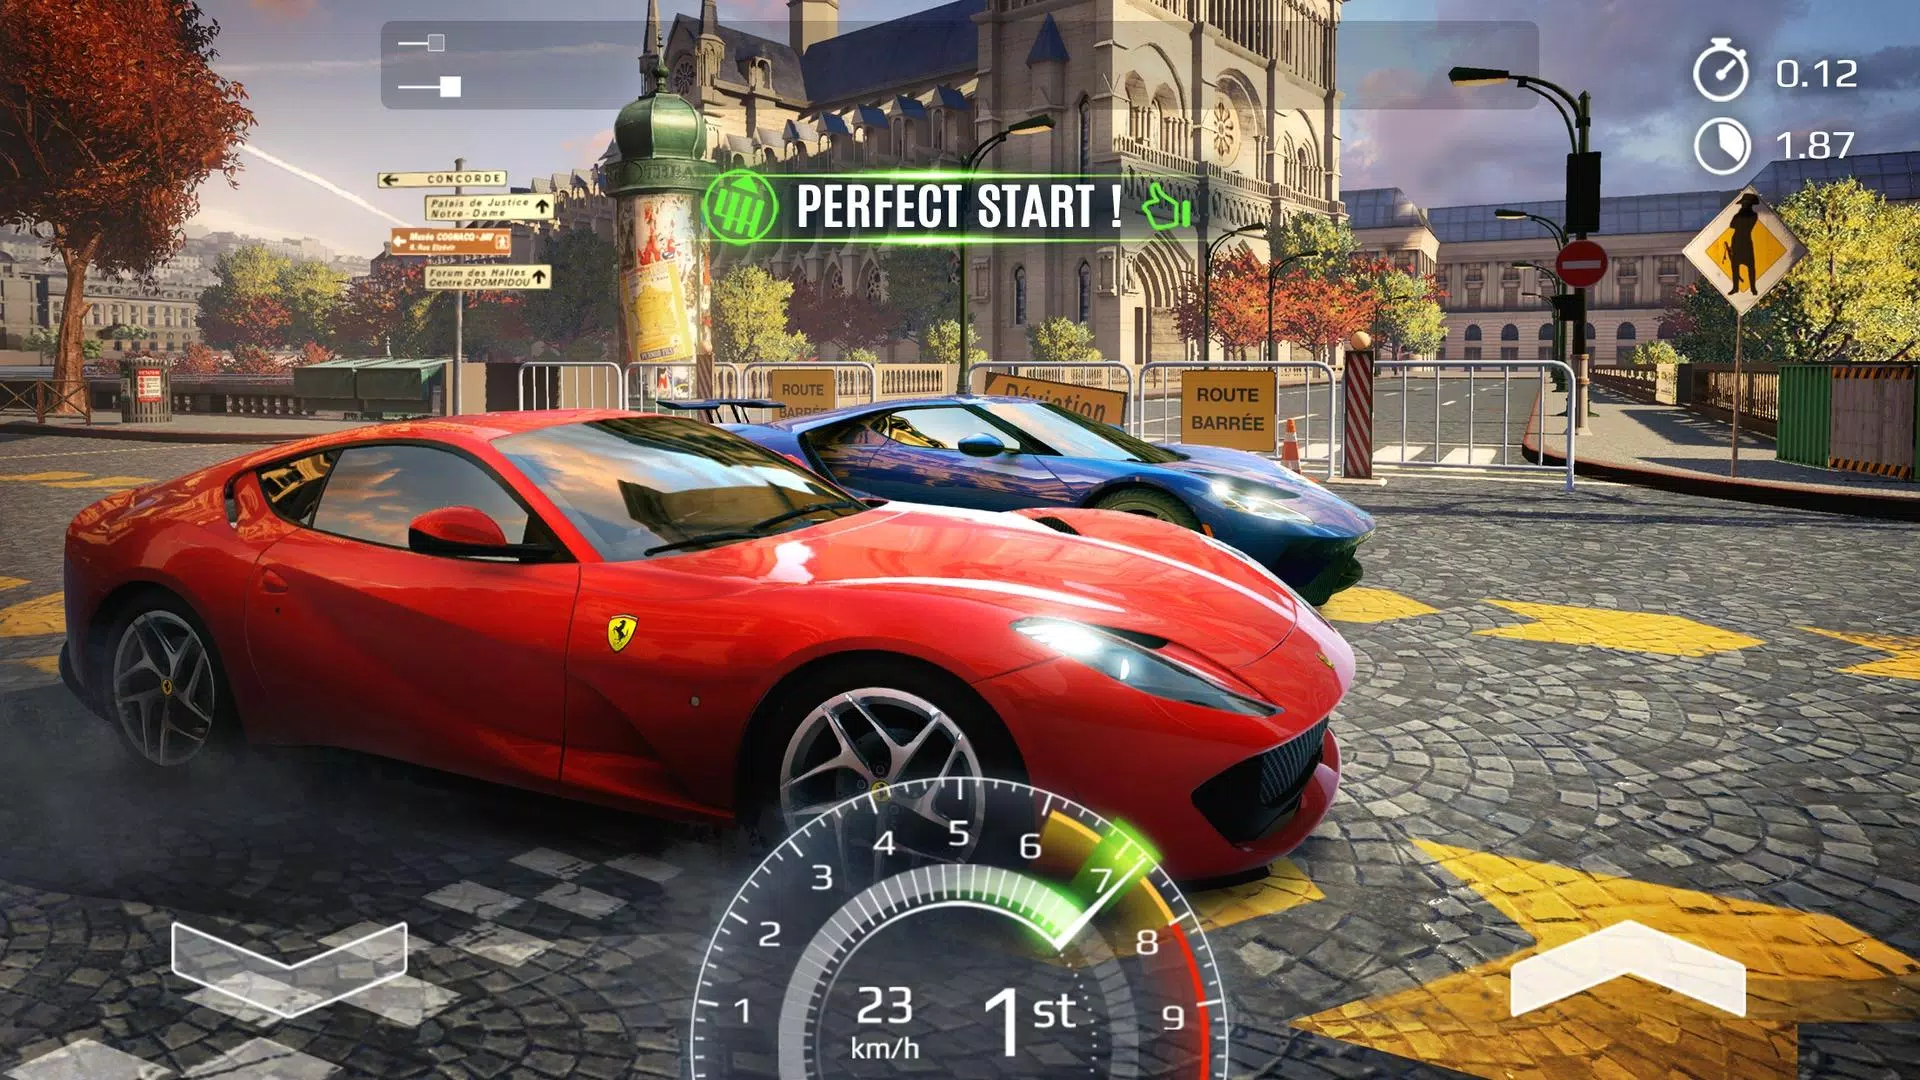 Asphalt Street Storm Racing: For the casual gamers